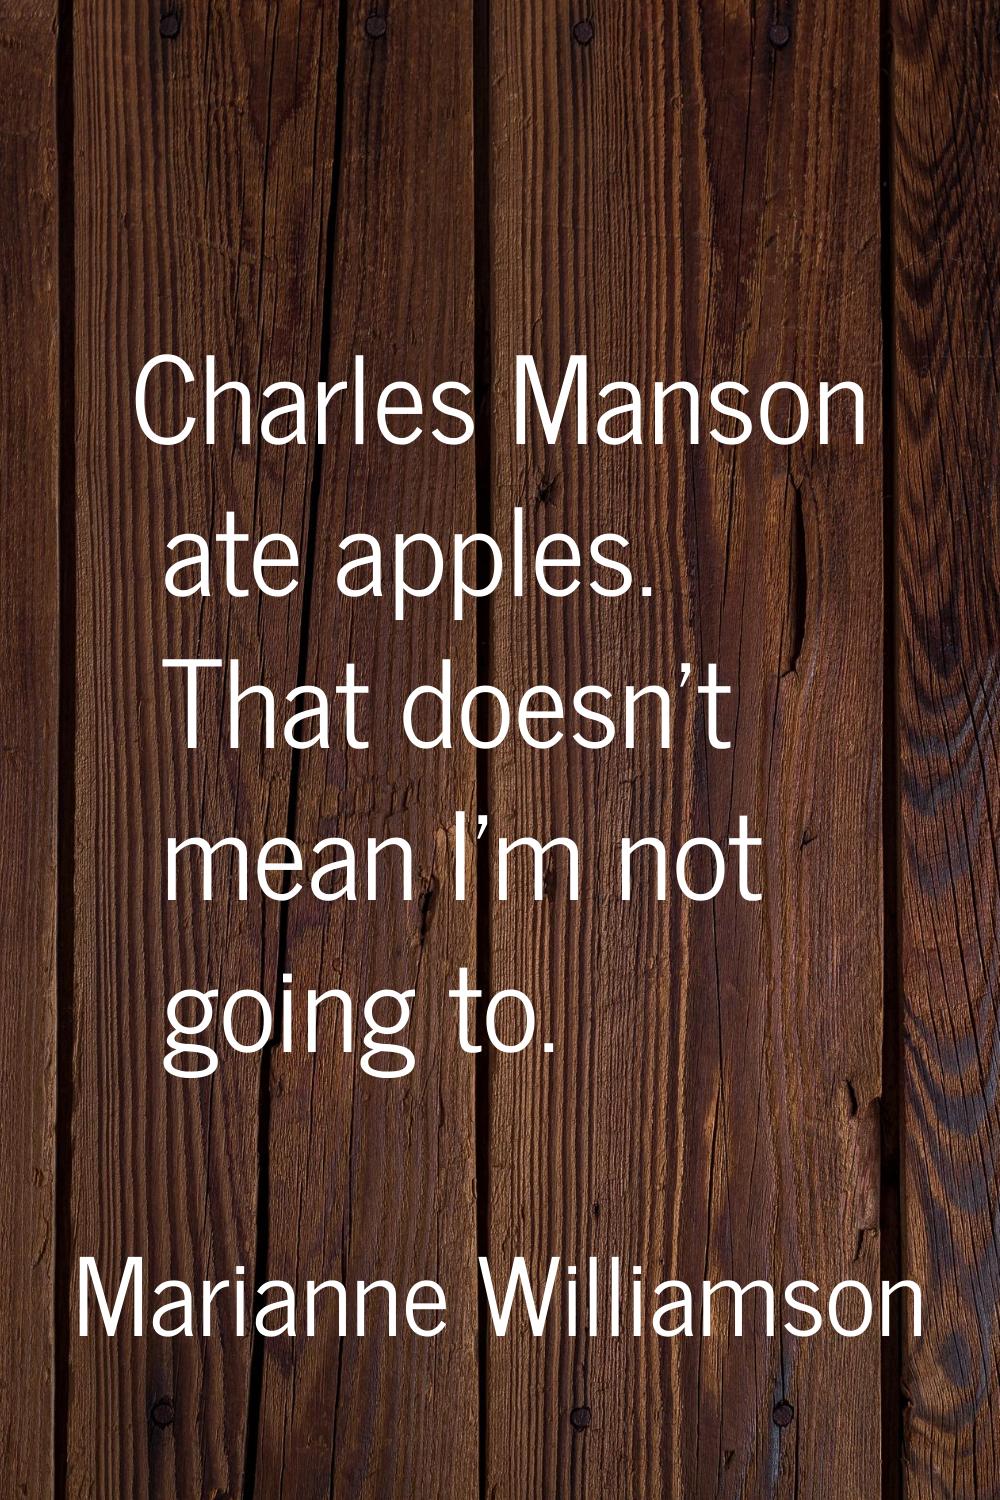 Charles Manson ate apples. That doesn't mean I'm not going to.